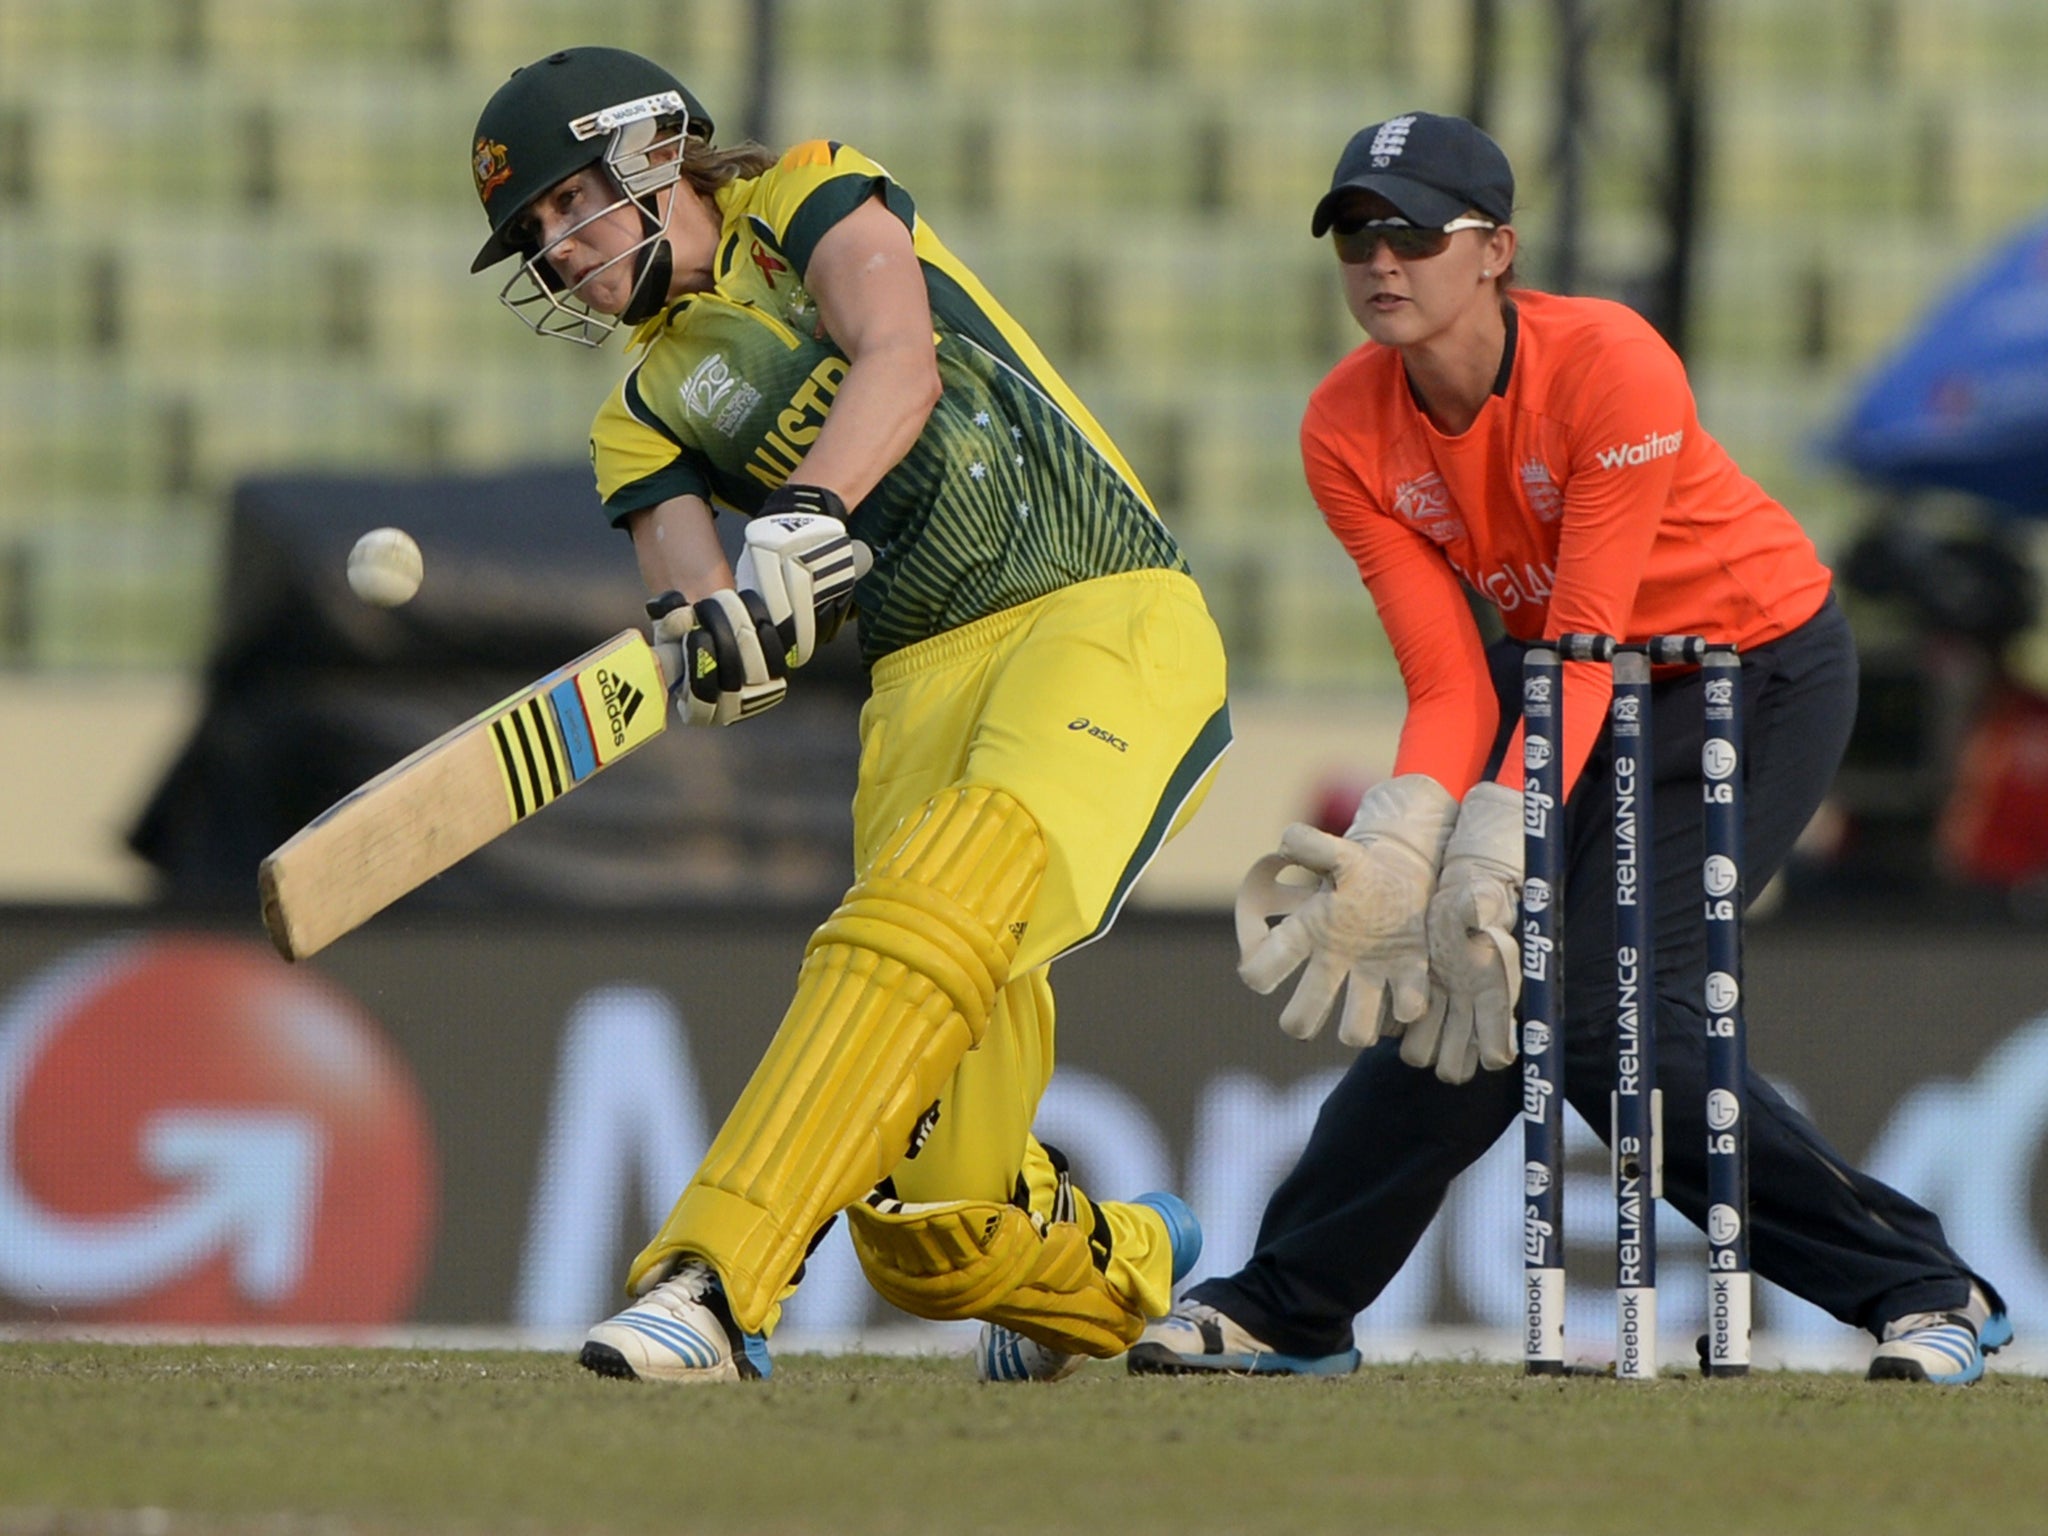 Australian cricketer Ellyse Perry (L) plays a shot as England wicket keeper Sarah Taylor looks on during the ICC Women's World Twenty20 final cricket match